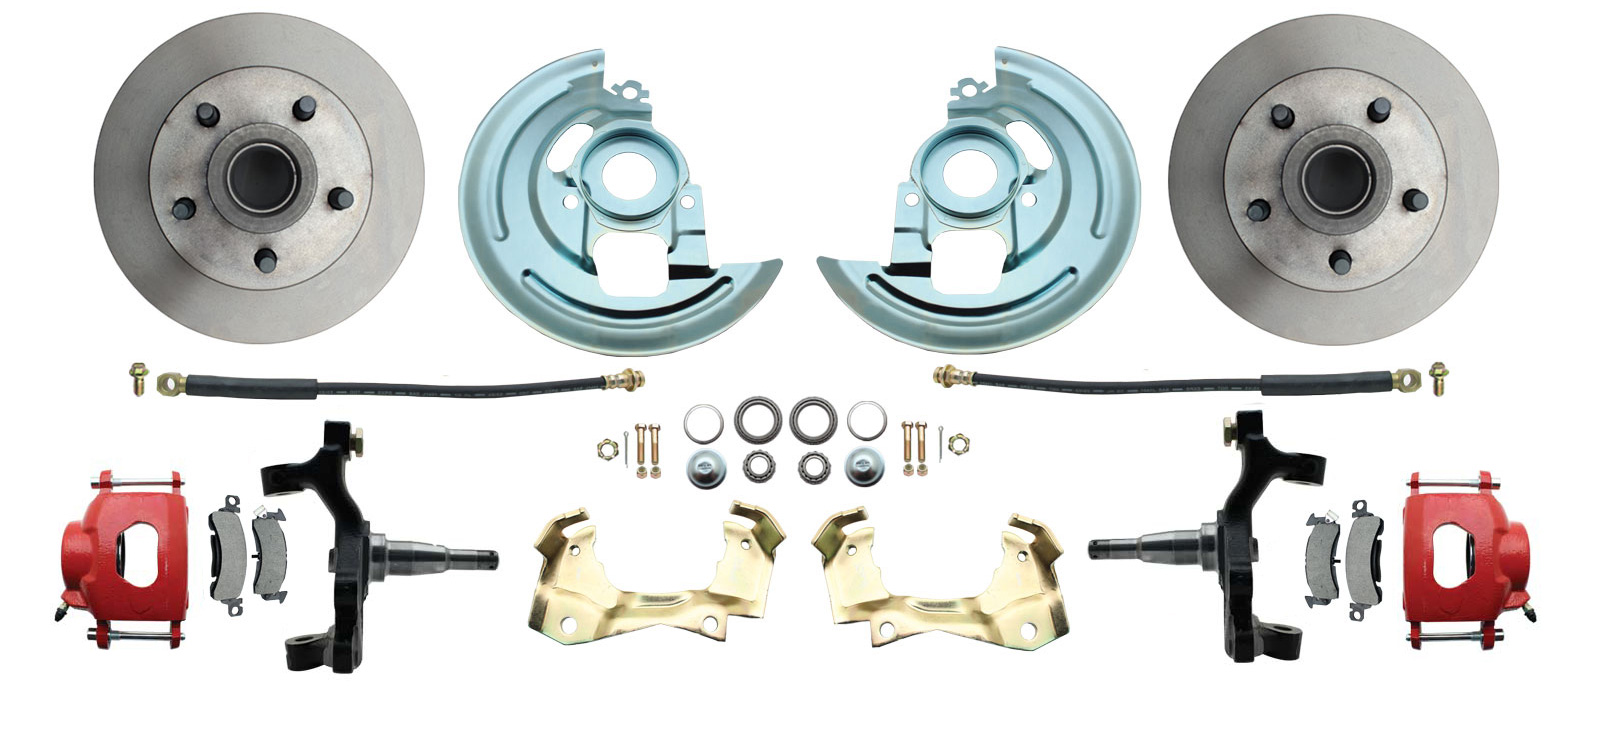 1964-1972 GM A Body (Chevelle, GTO, Cutlass) 2 Drop Front Disc Brake Kit Red Calipers